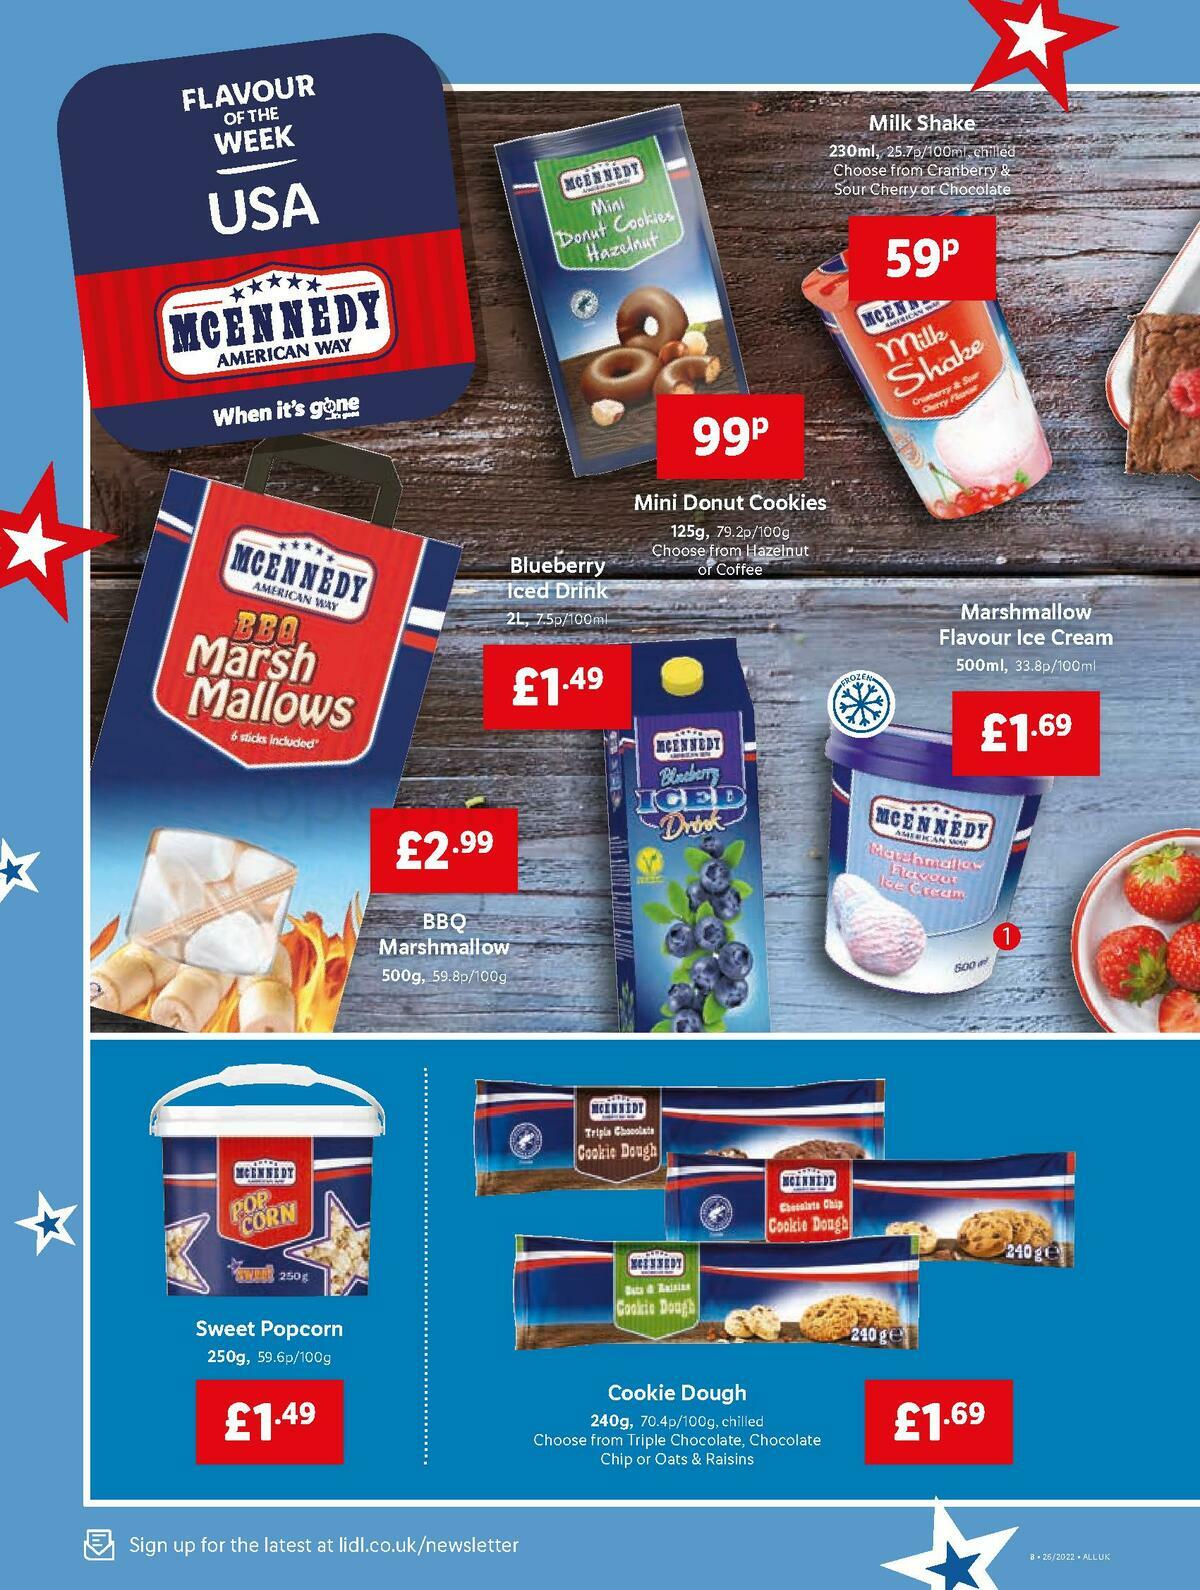 LIDL Offers from 30 June